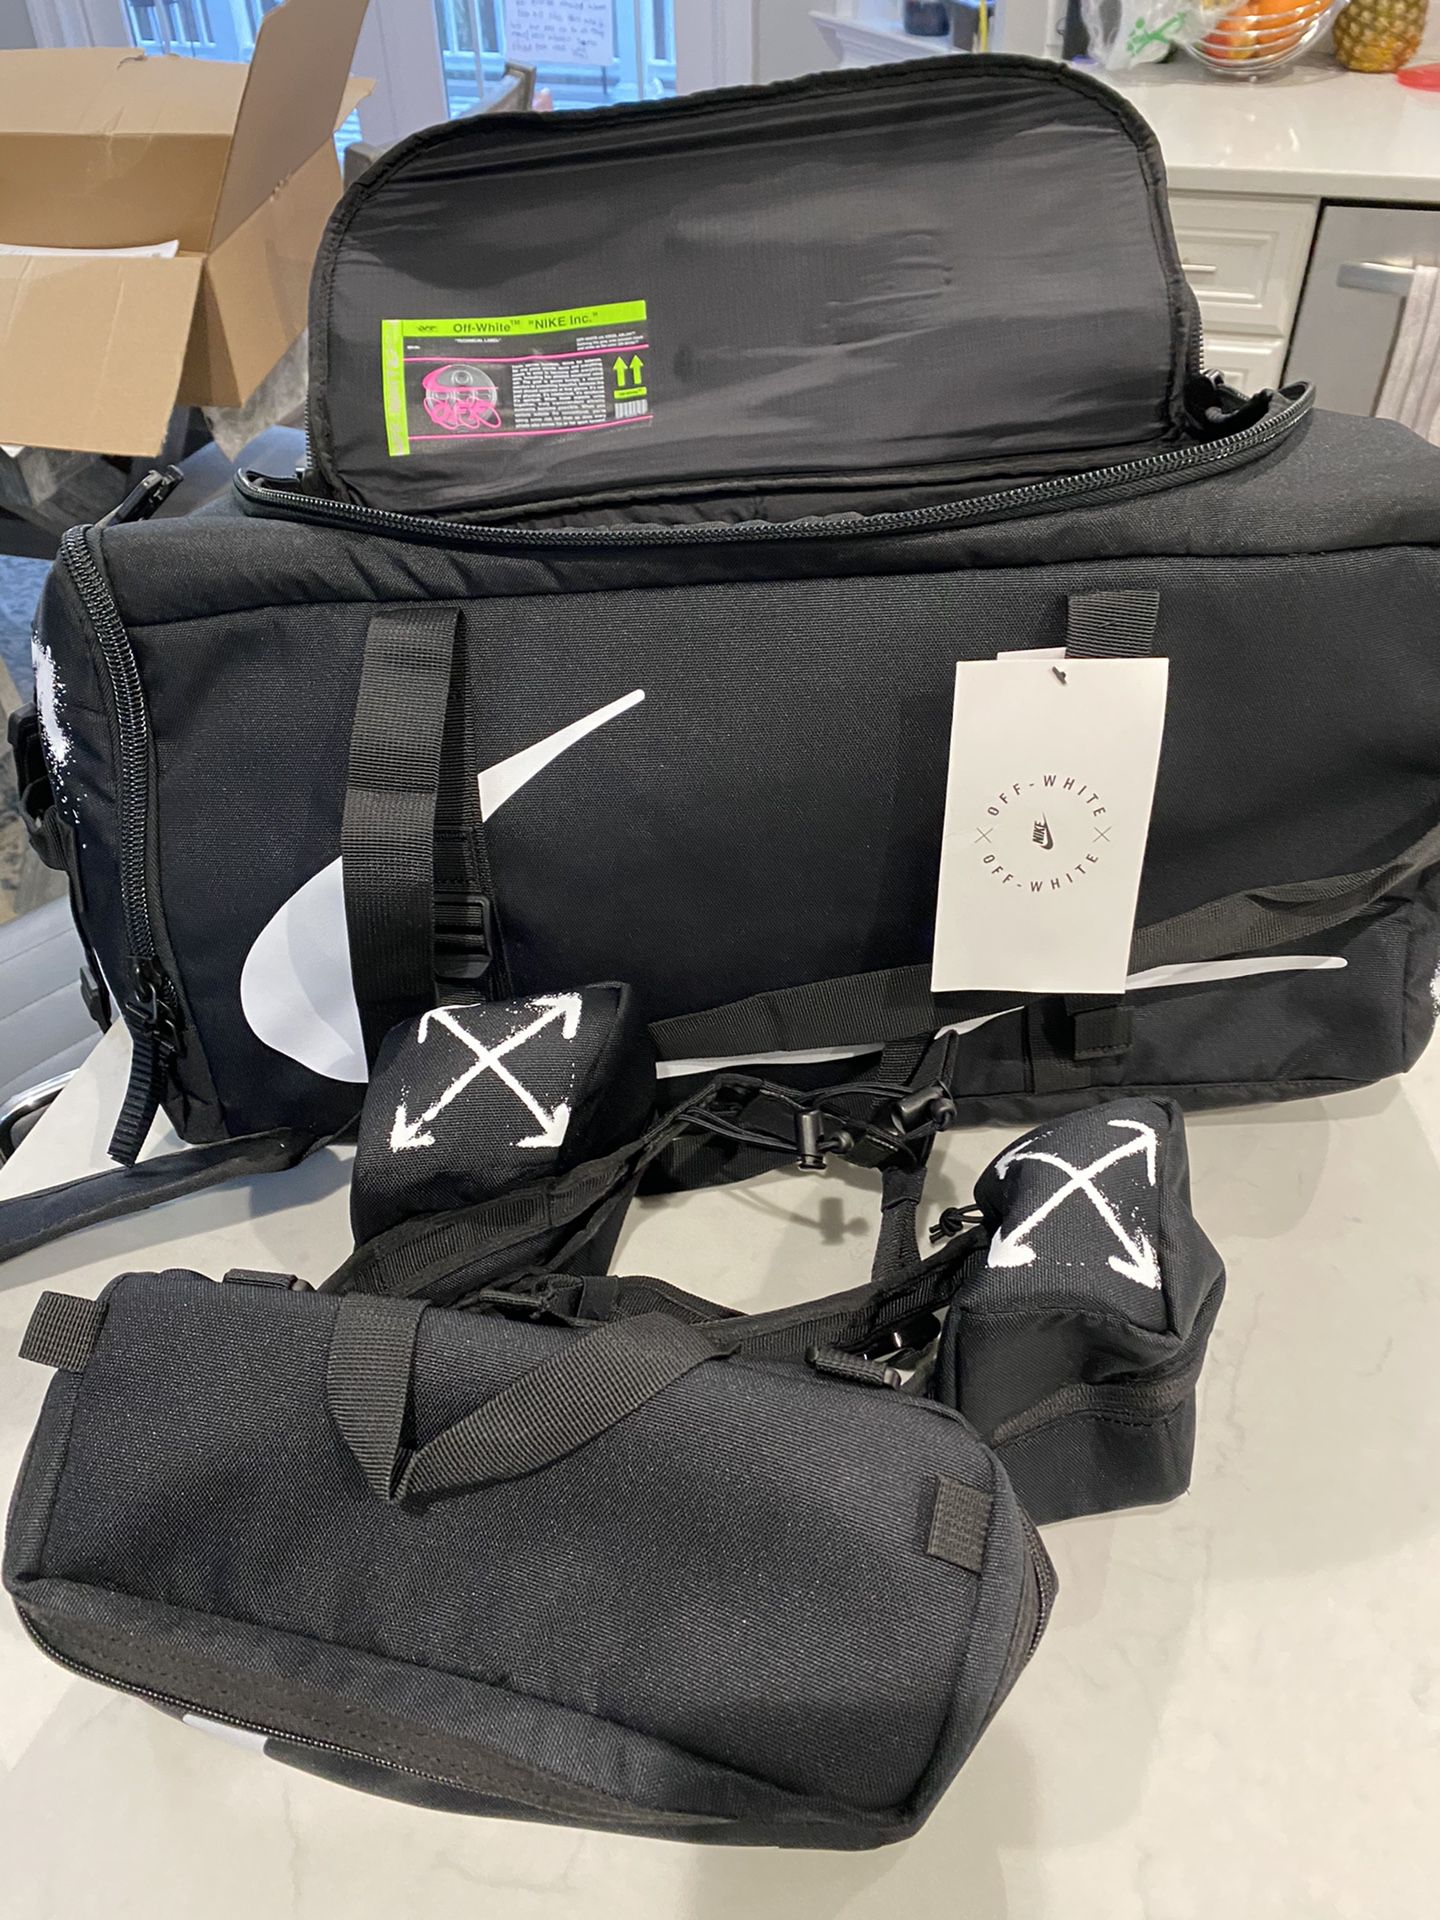 Nike off white duffle back and waist bag new $325 for Sale in New